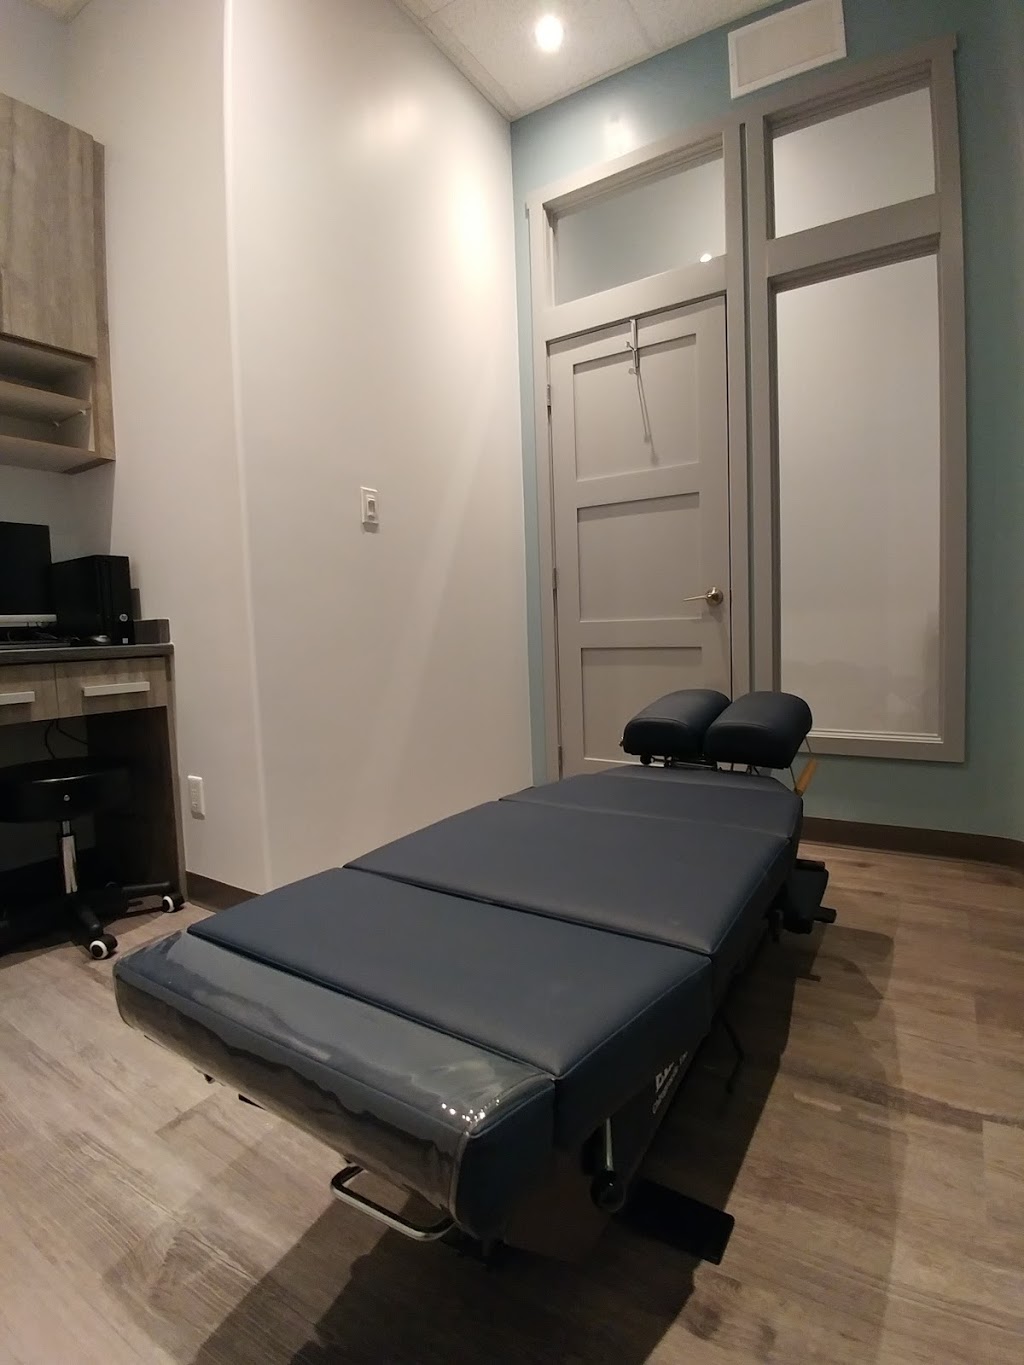 Windermere Chiropractor & Physiotherapy Clinic | 6279 Andrews Loop Southwest, Edmonton, AB T6W 3G9, Canada | Phone: (780) 628-2881